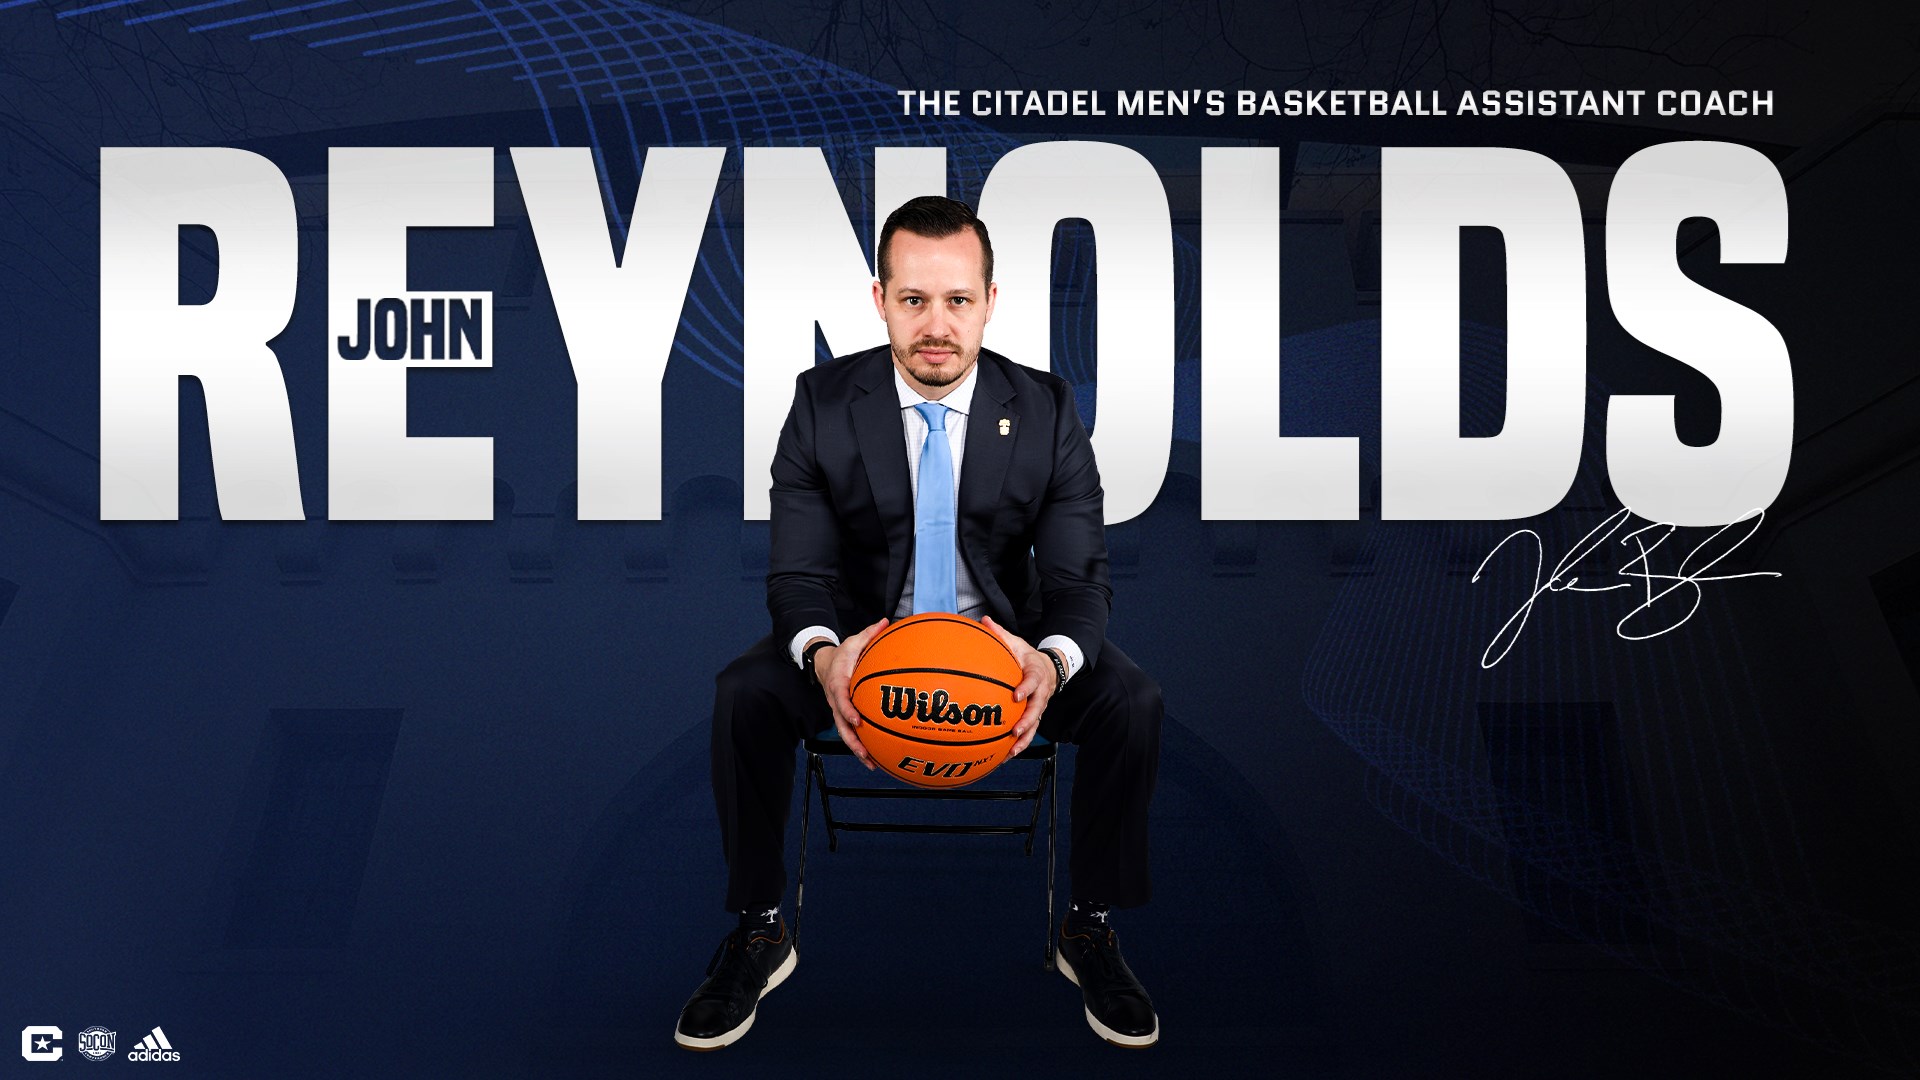 OFFICIAL: Reynolds named Assistant Coach at The Citadel - HoopDirt